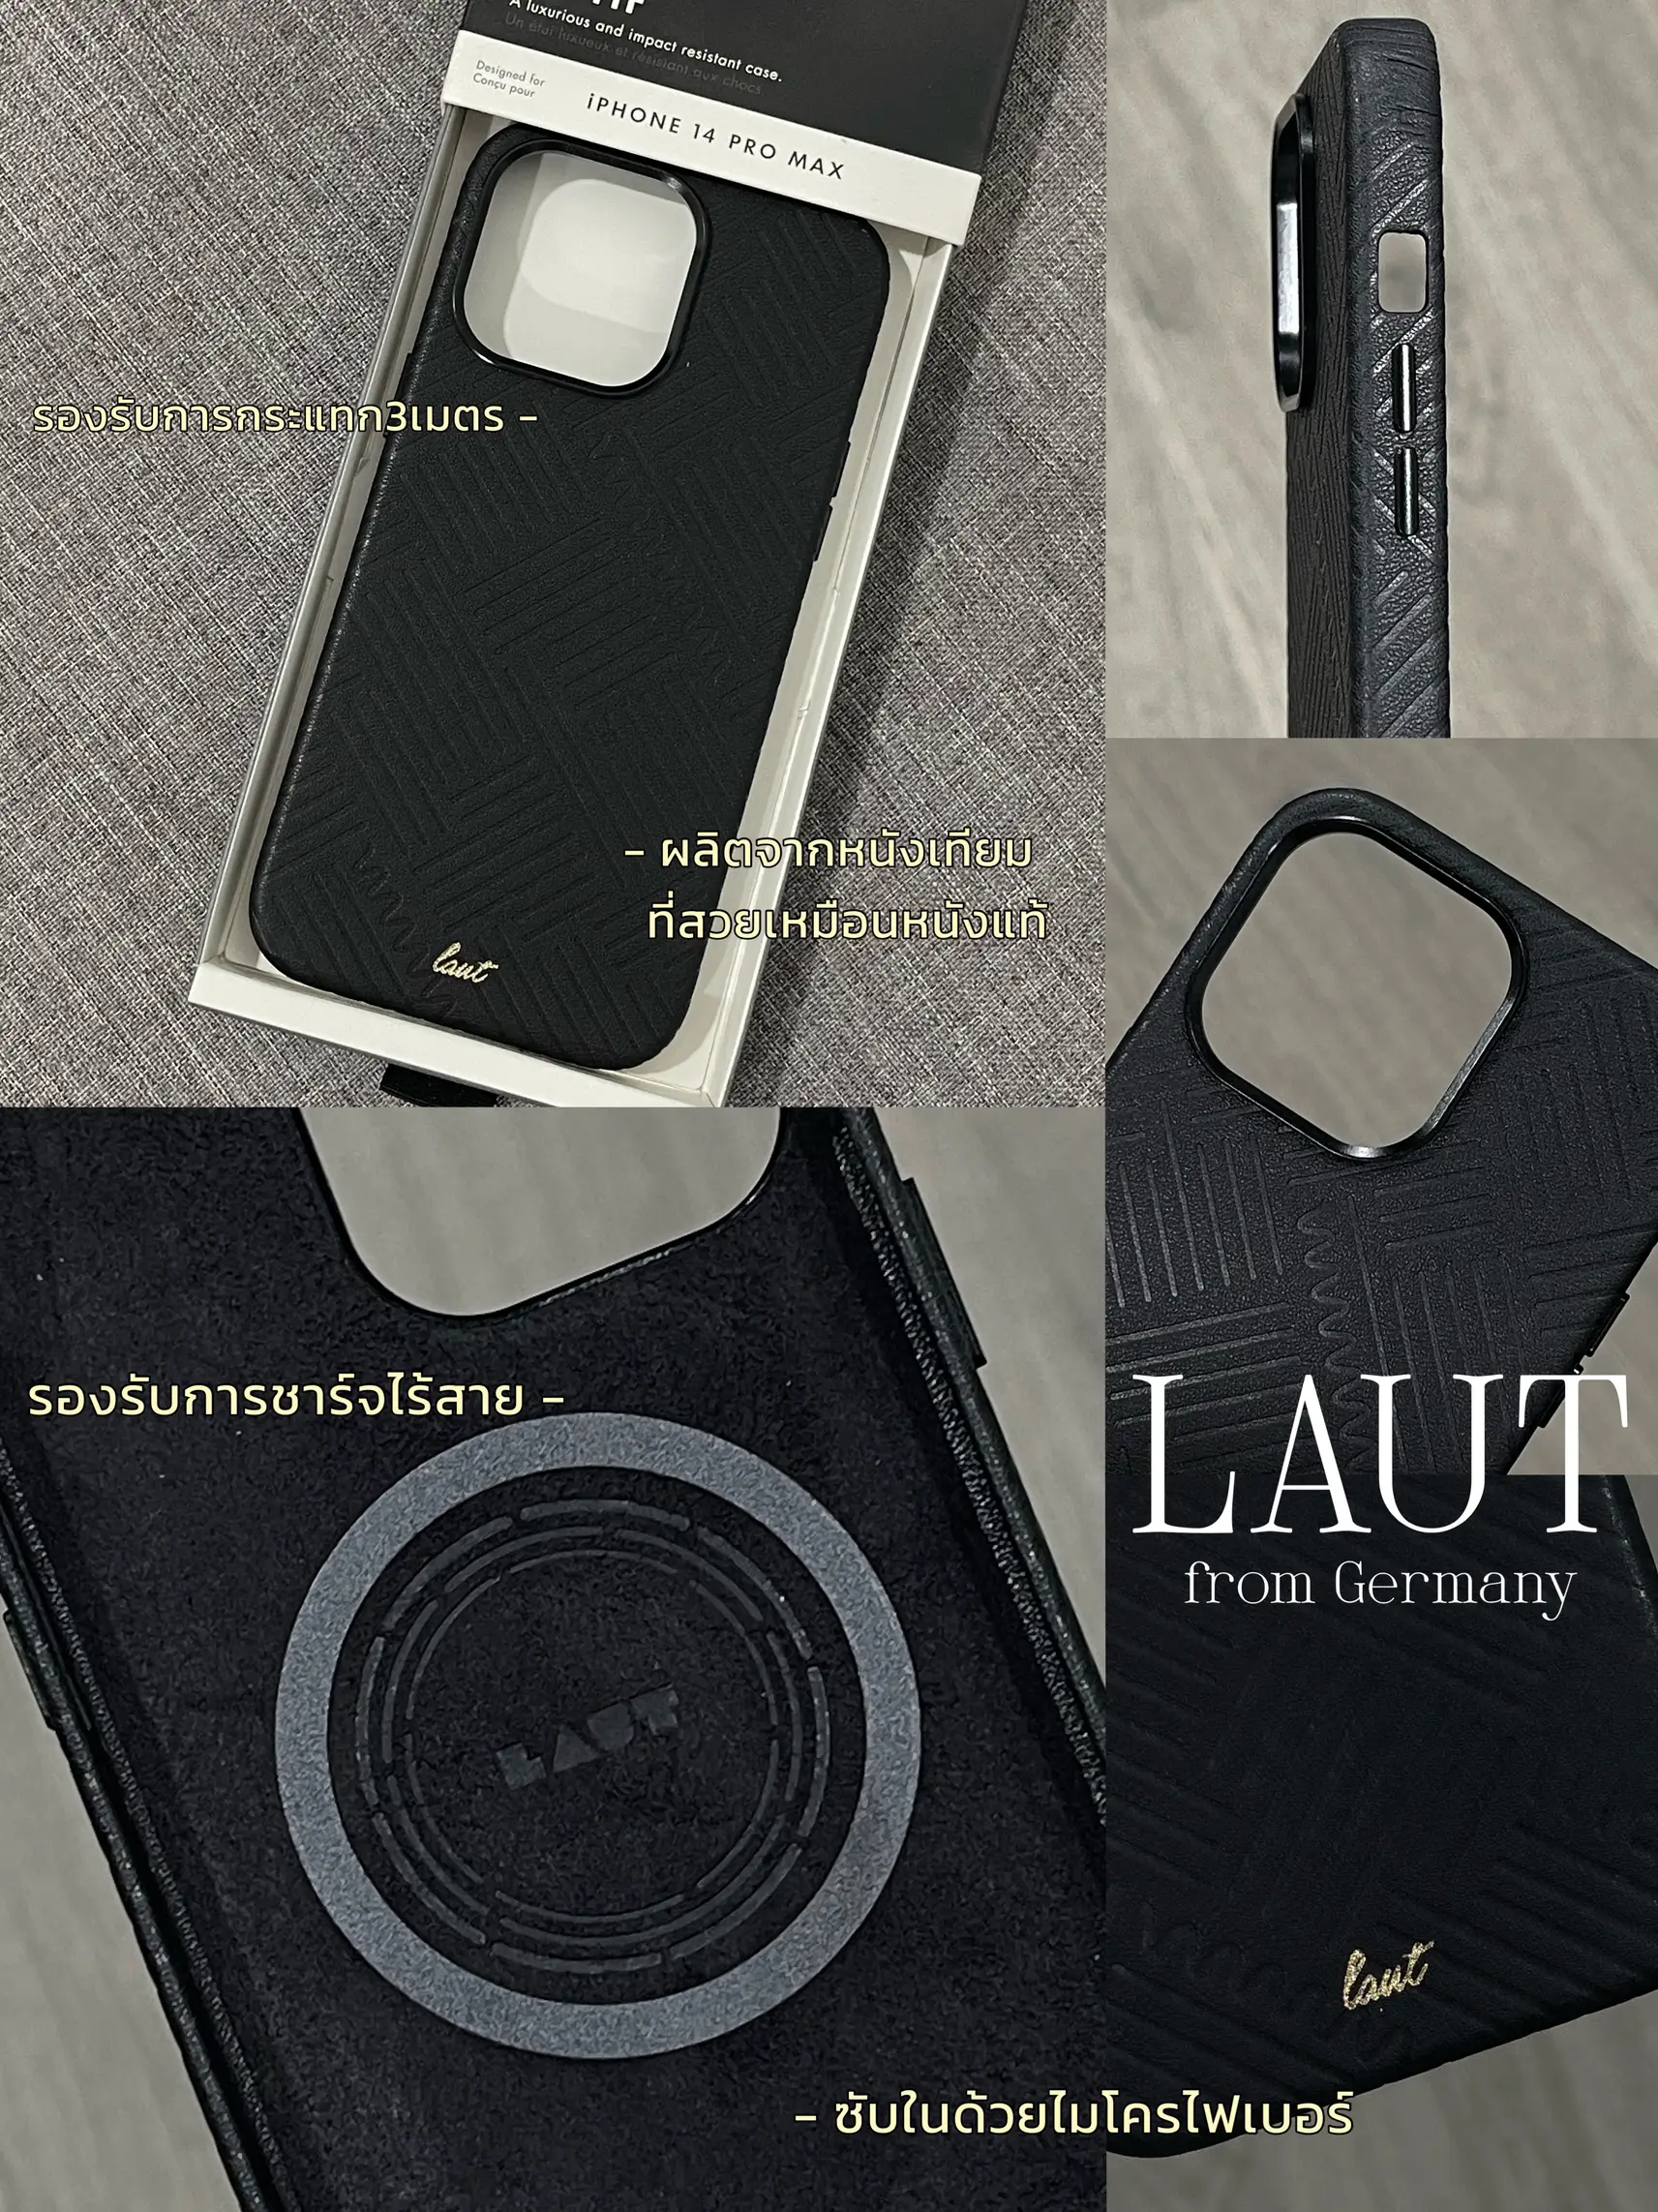 Mous Limitless Phone Case Review (Does it live up to the hype